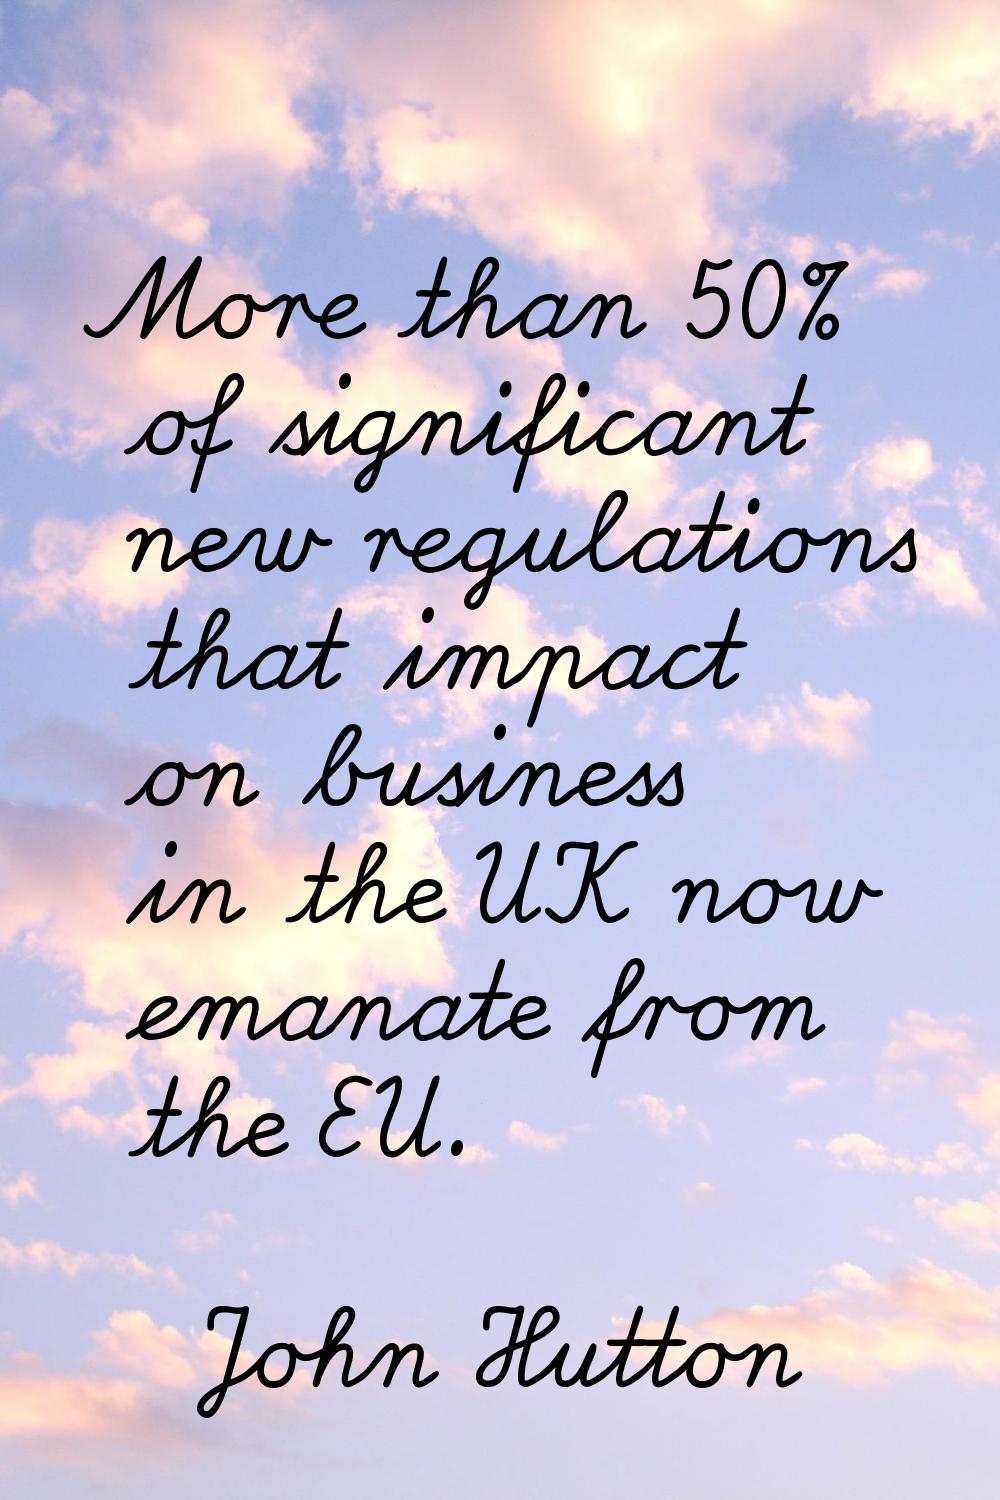 More than 50% of significant new regulations that impact on business in the UK now emanate from the